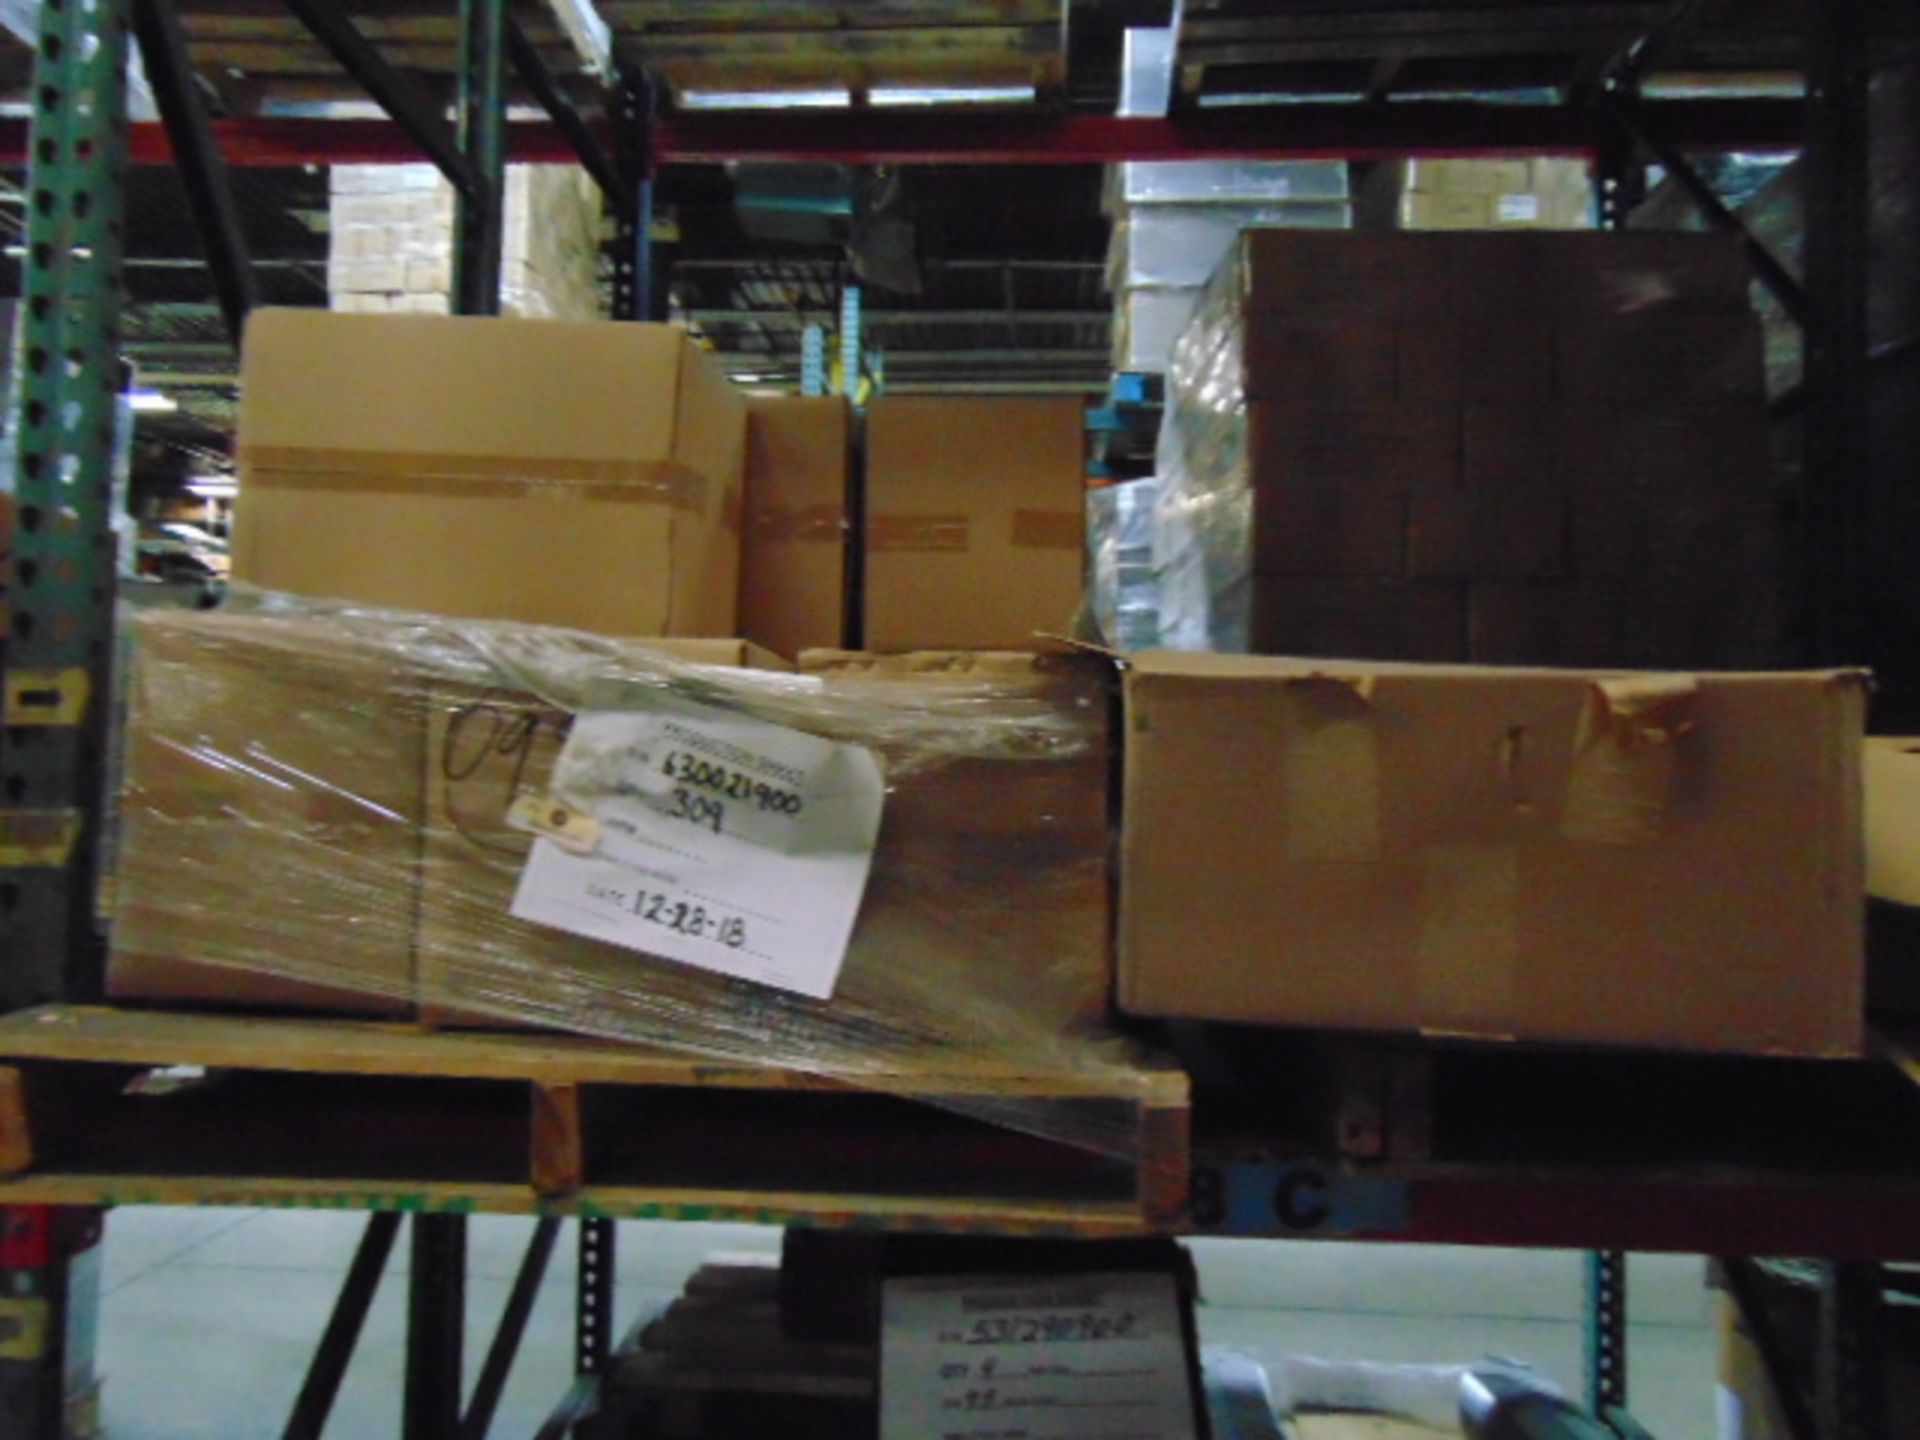 LOT CONTENTS OF PALLET RACKING SECTIONS (24) : steel parts, 3 x 5 followers, plastic hooks, - Image 31 of 33